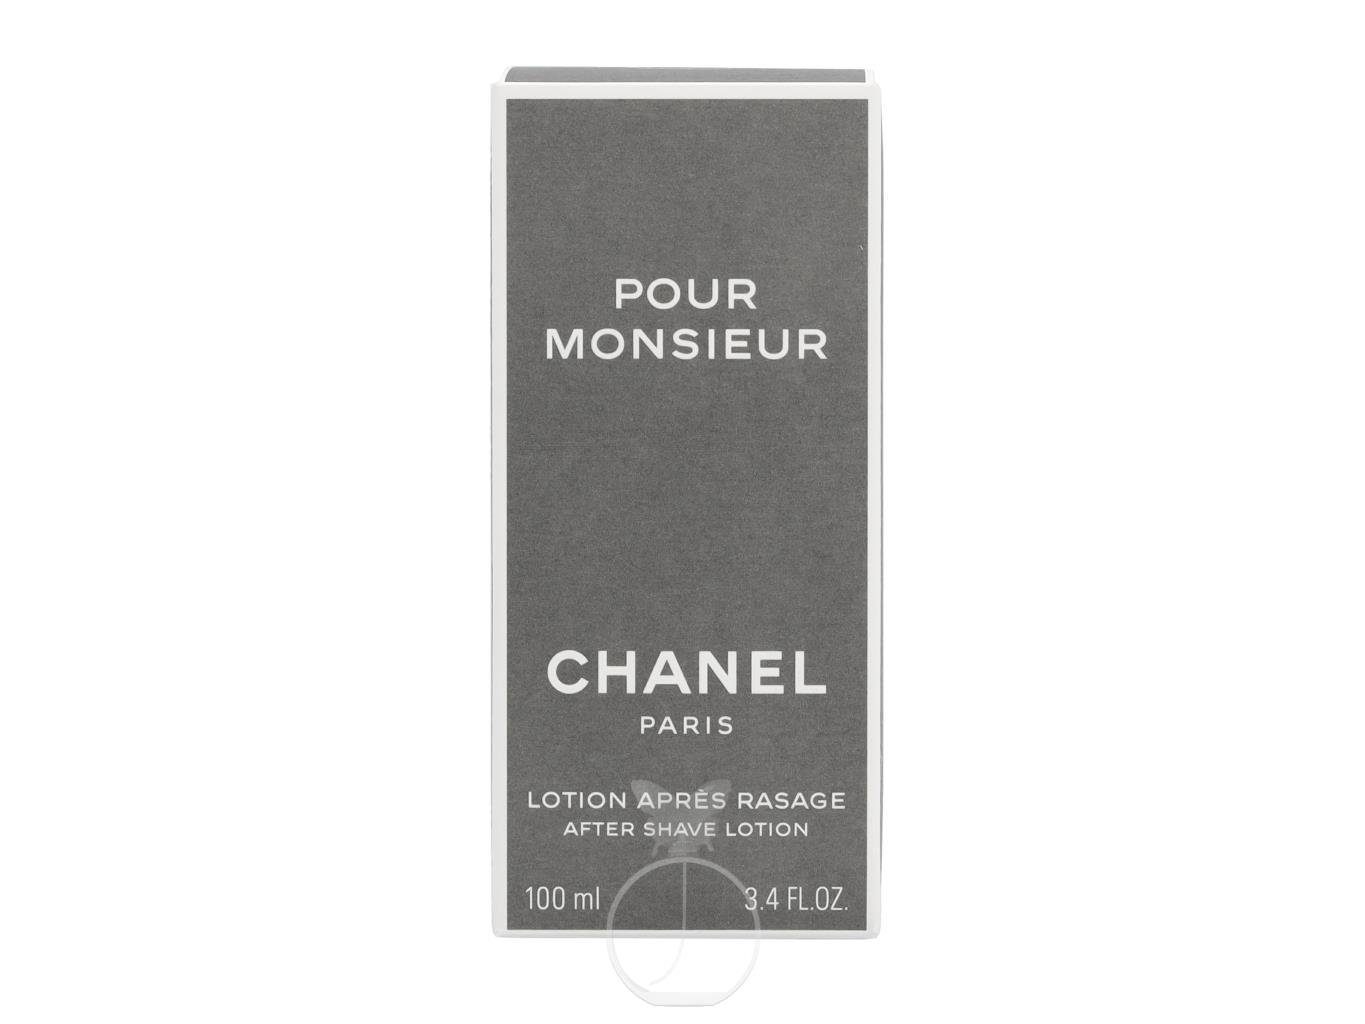 Lotion Pour After Monsieur Shave Lotion Shave CHANEL Packung ml 100 After Chanel